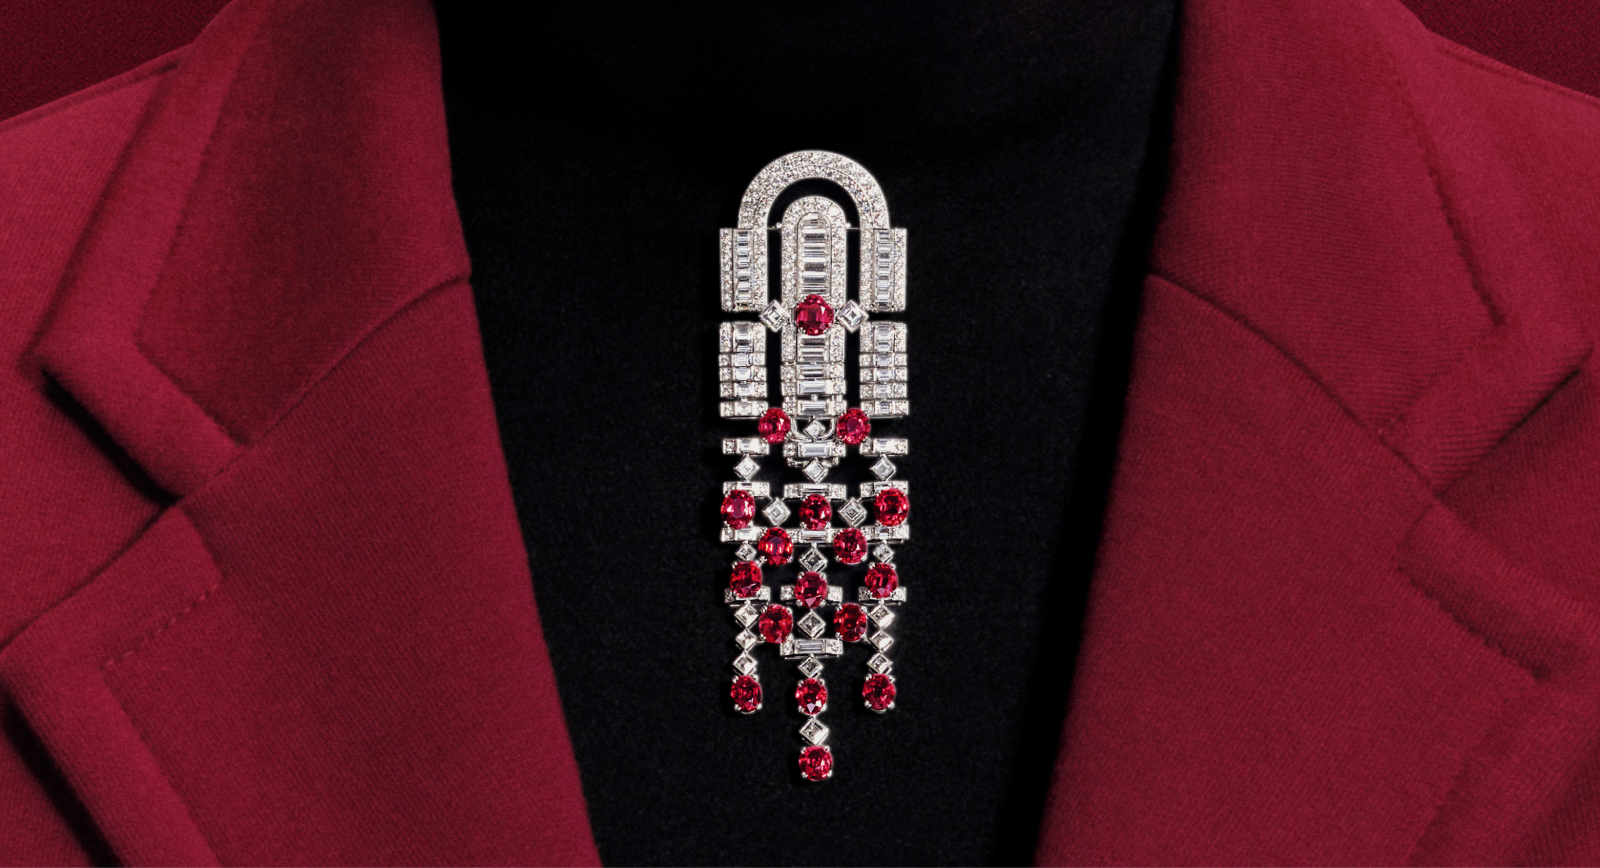 Rolling Red brooch with 17 oval rubies from Mozambique for a total weight of 18.82 carats, paved with diamonds in 18k white gold from the Boucheron Like a Queen High Jewellery Collection